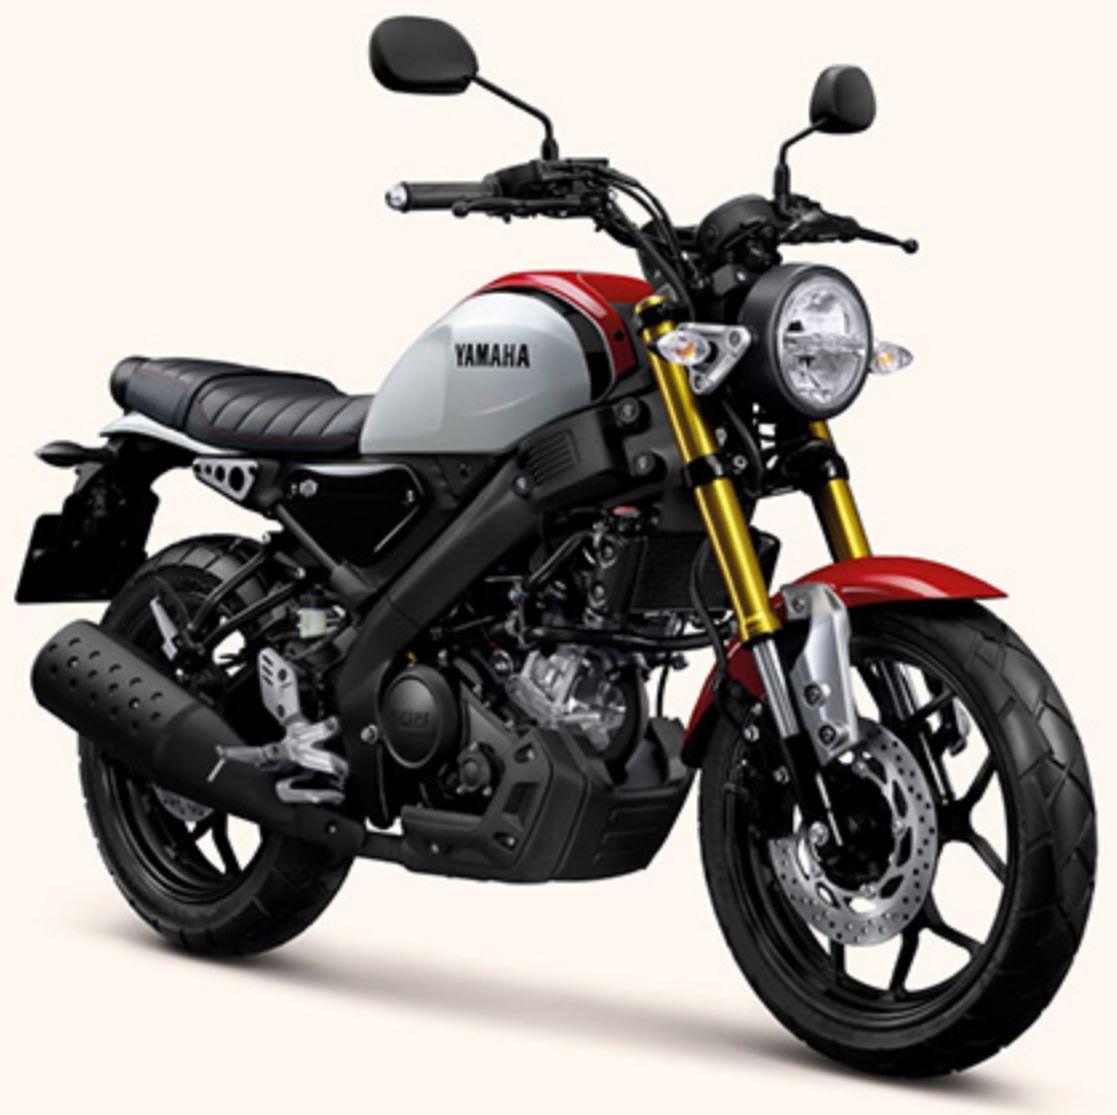 Yamaha XSR Price, Specs, Review, Pics & Mileage in India